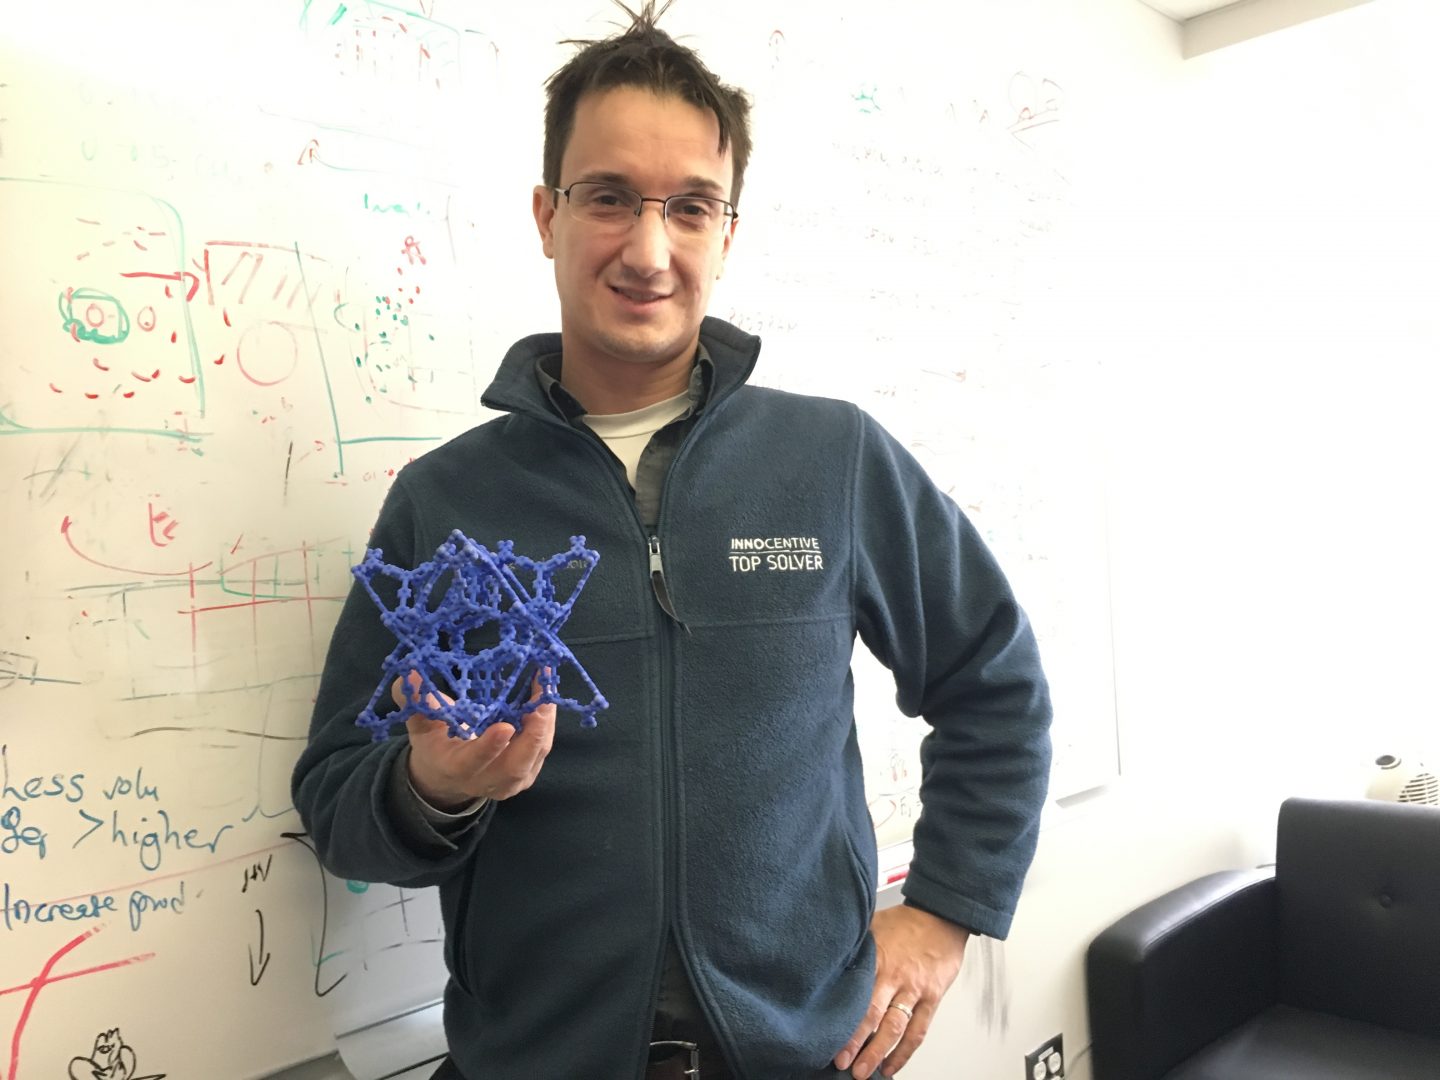 Chris Wilmer, assistant professor of chemical engineering at the University of Pittsburgh, holds a model of a metal organic framework.